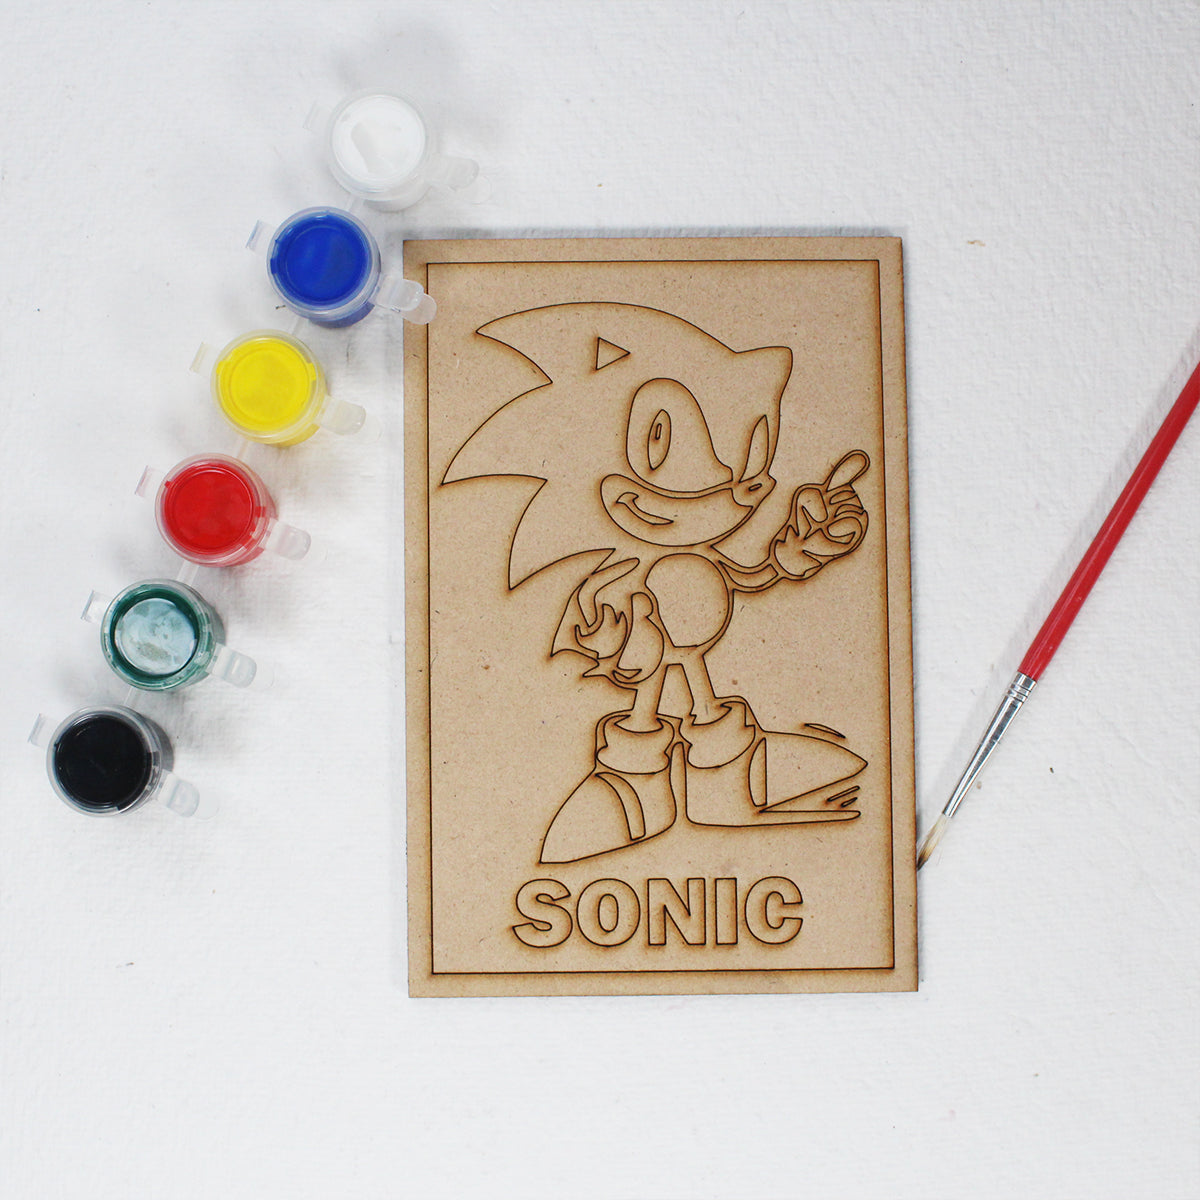 Sonic Canvas Painting Kit